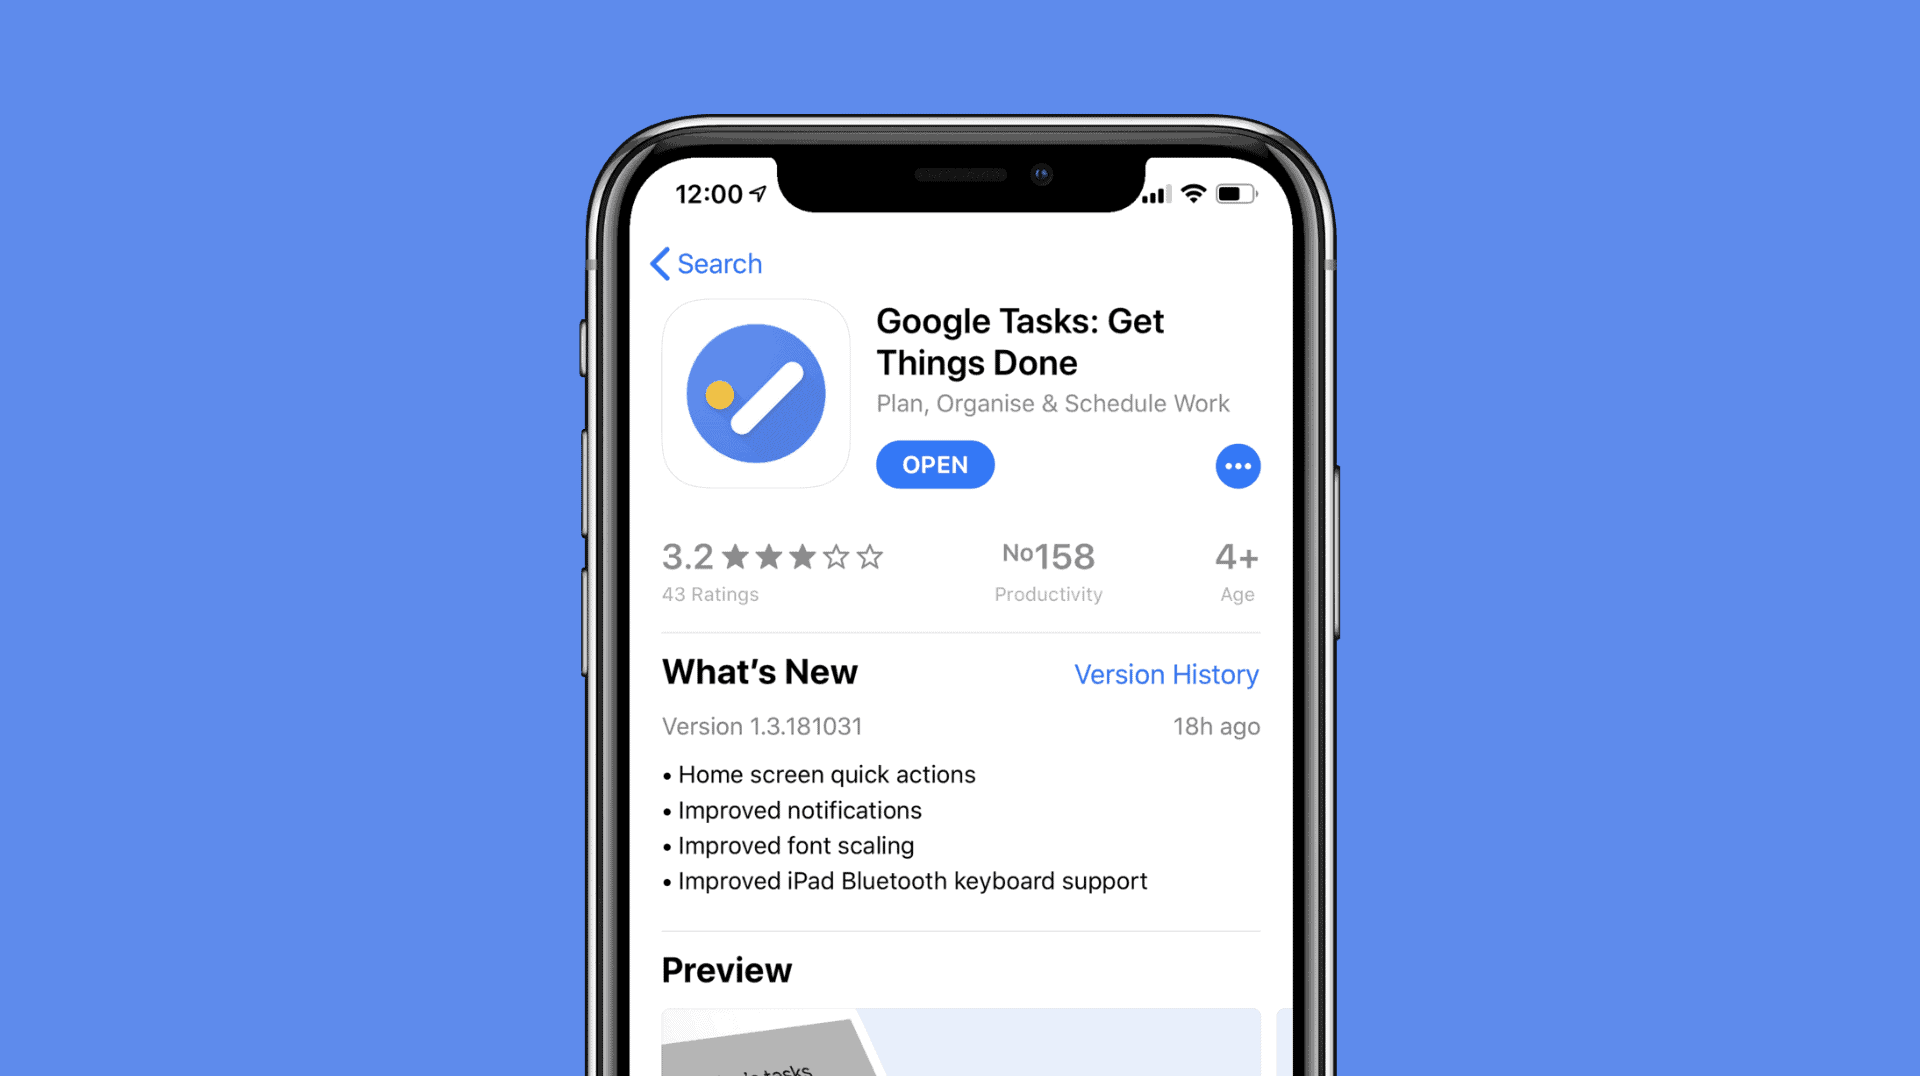 Google Tasks iOS app gains Quick Actions and a few other improvements